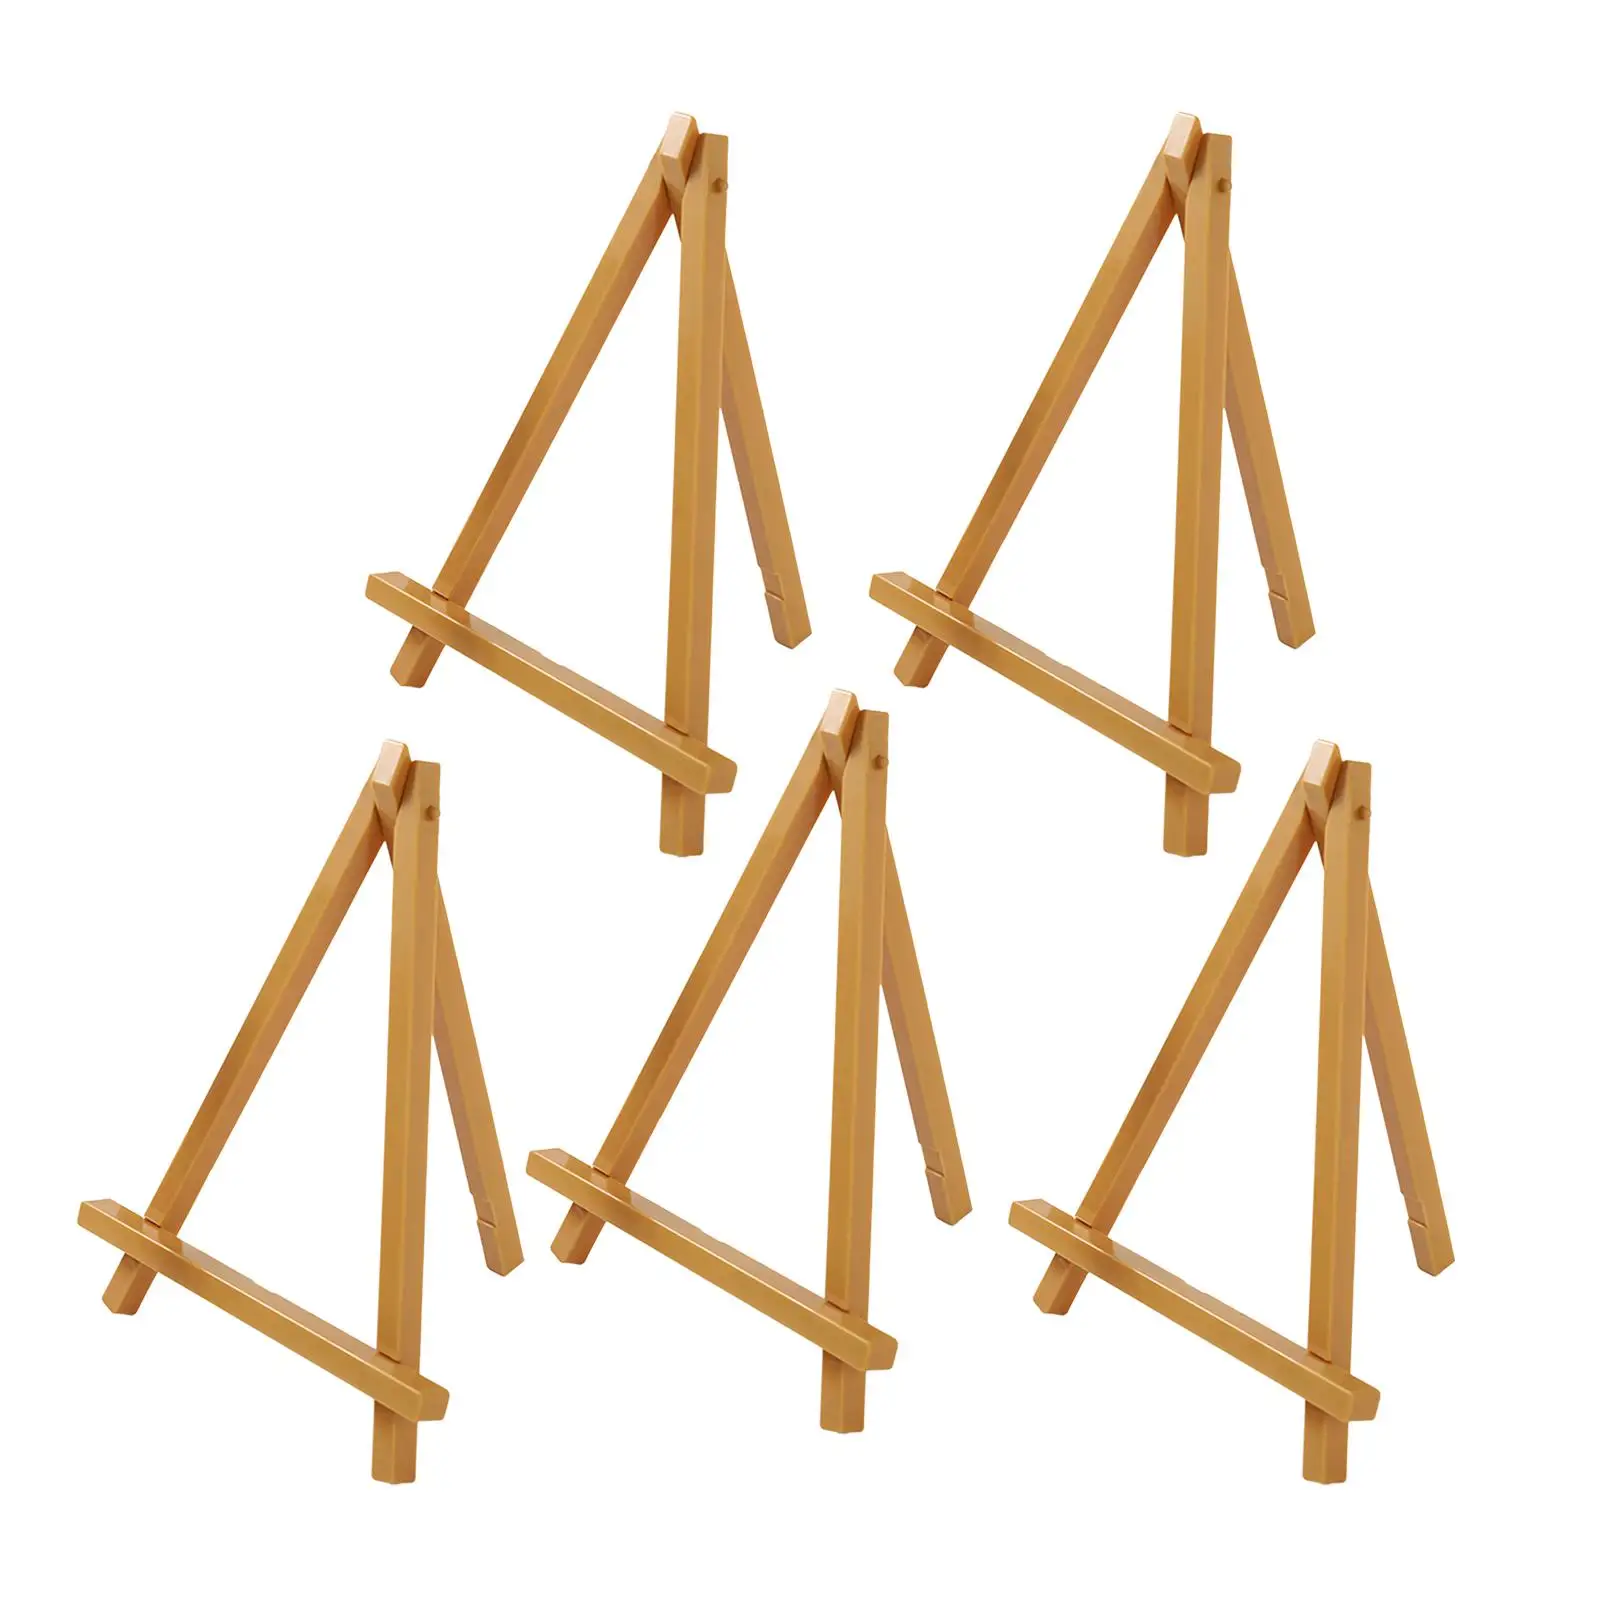 5x Mini Wooden Easel Holder Posters Photo Picture Cemetery Number Card Stand Art Boards for Painting Canvas Tripod Display Easel